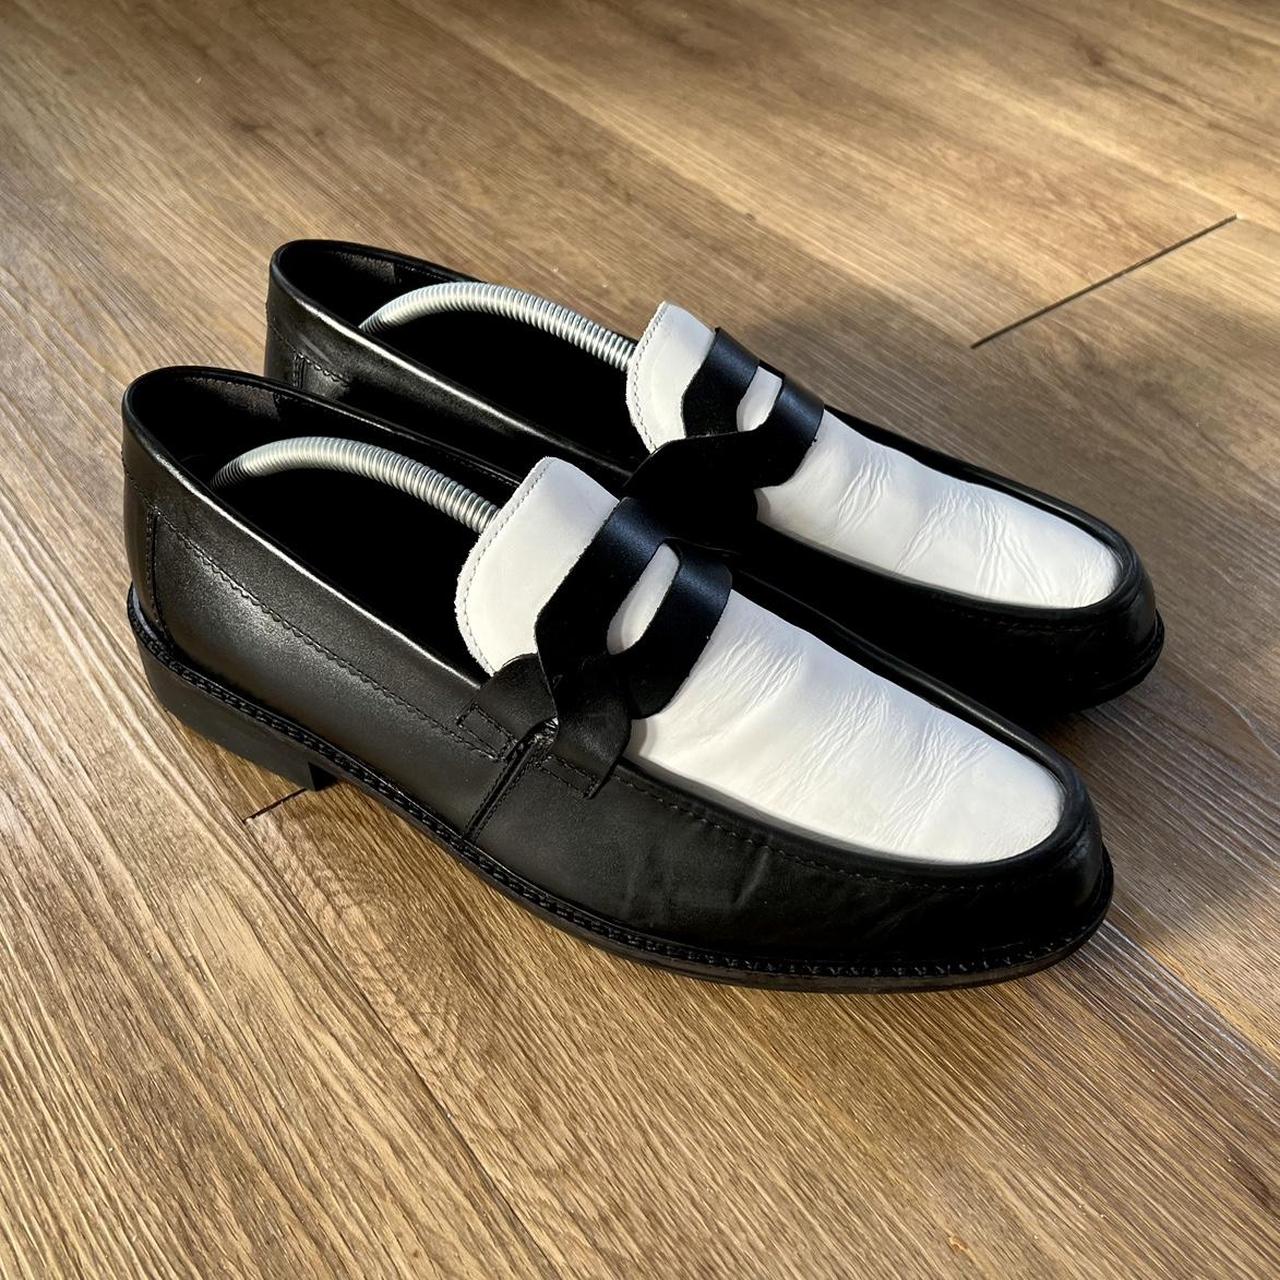 H by Hudson Men's Black and White Loafers | Depop